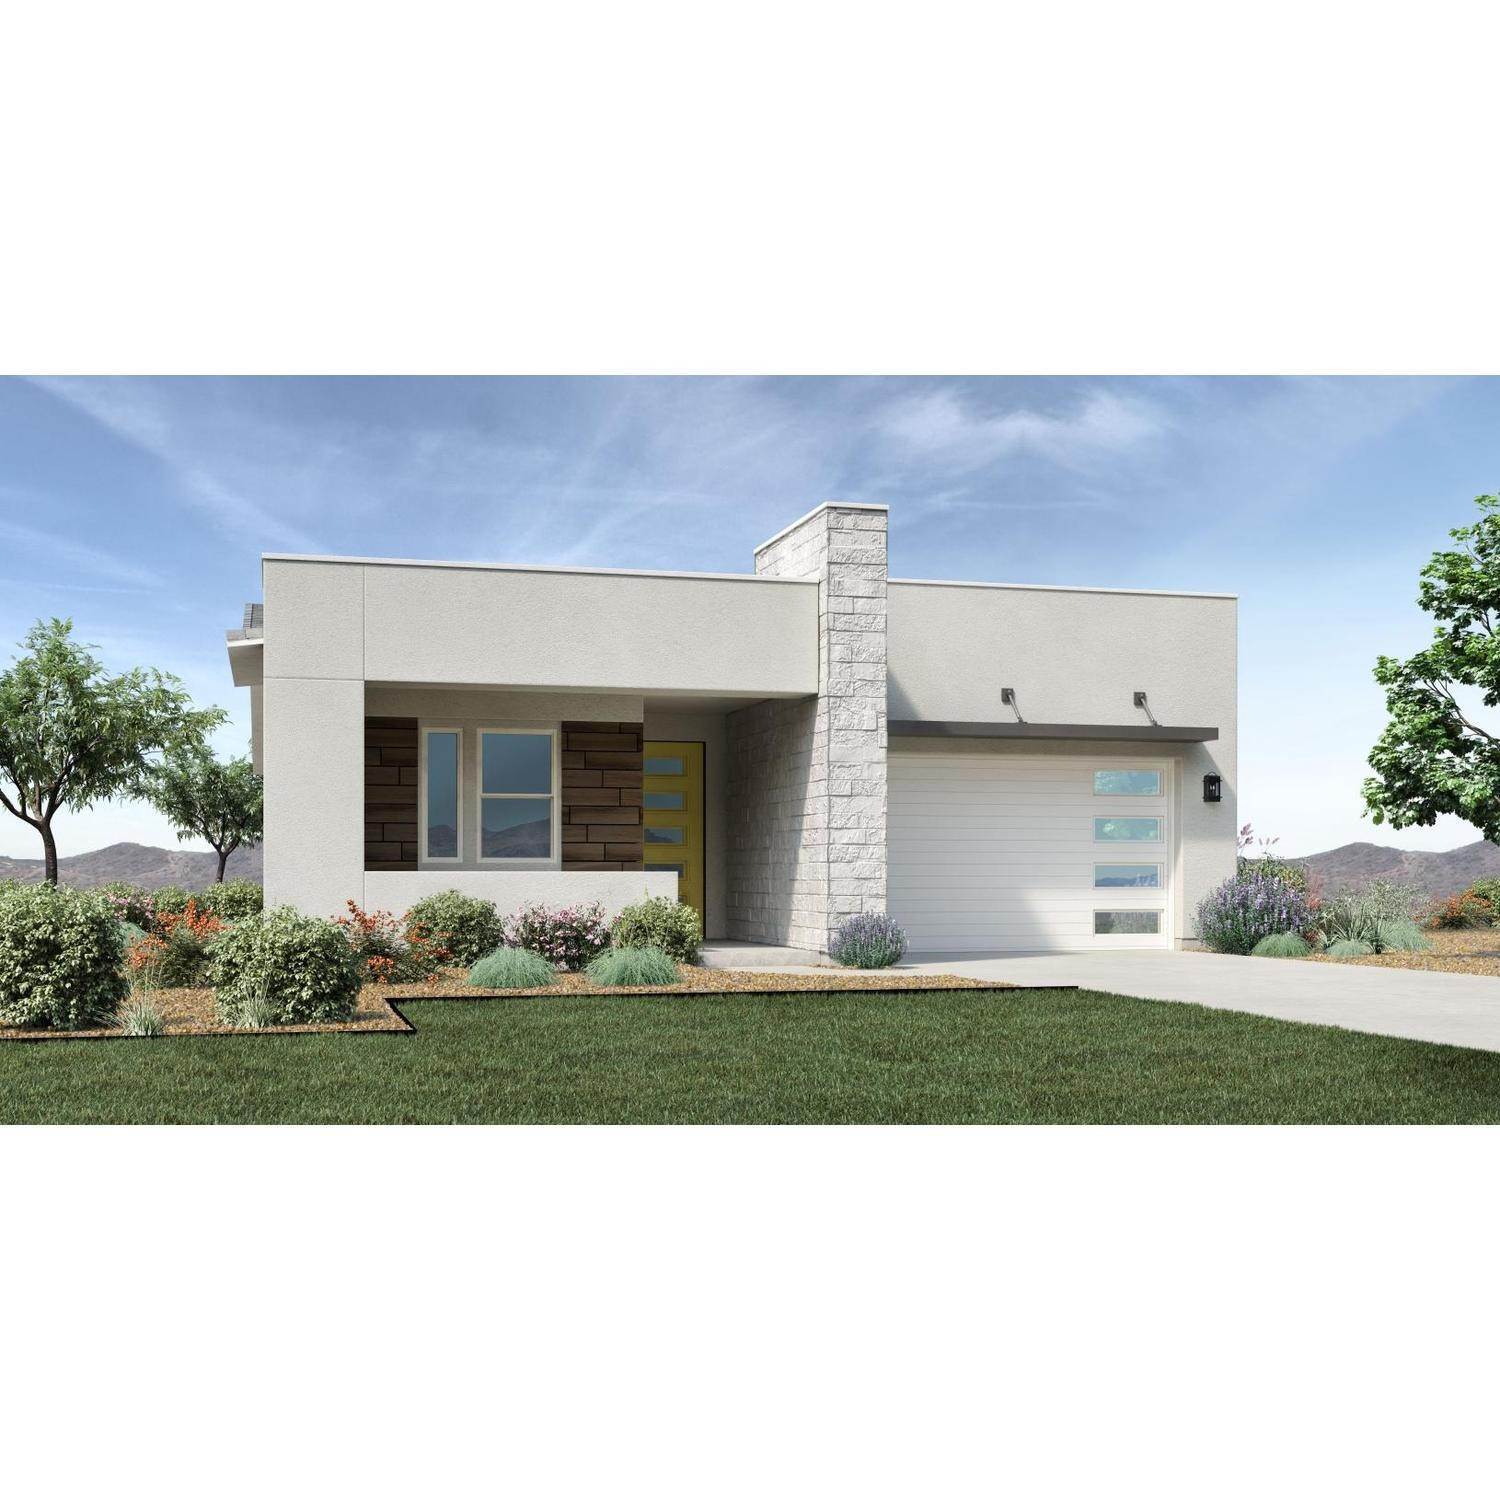 2. Single Family for Sale at Toll Brothers at Cadence - Mosaic Collection 10108 E Tesla Ave, Mesa, AZ 85212